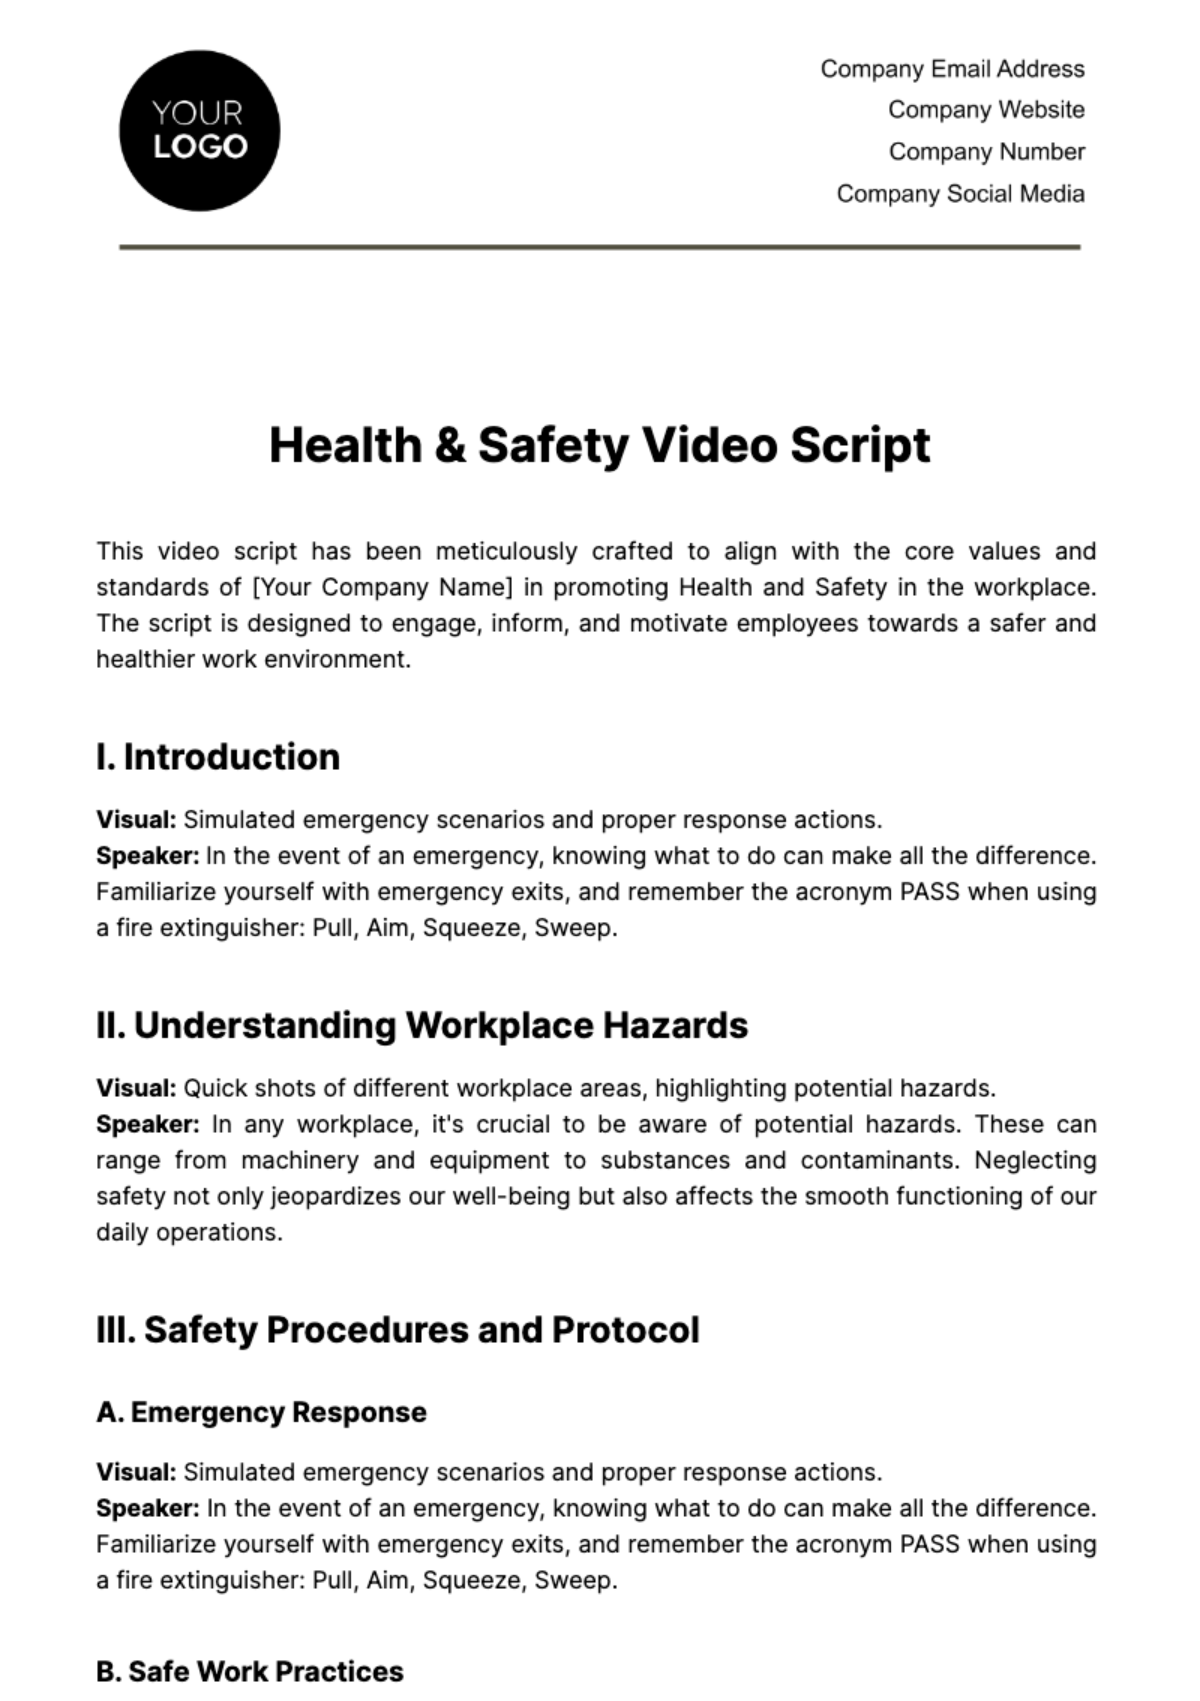 Free Health & Safety Video Script Template